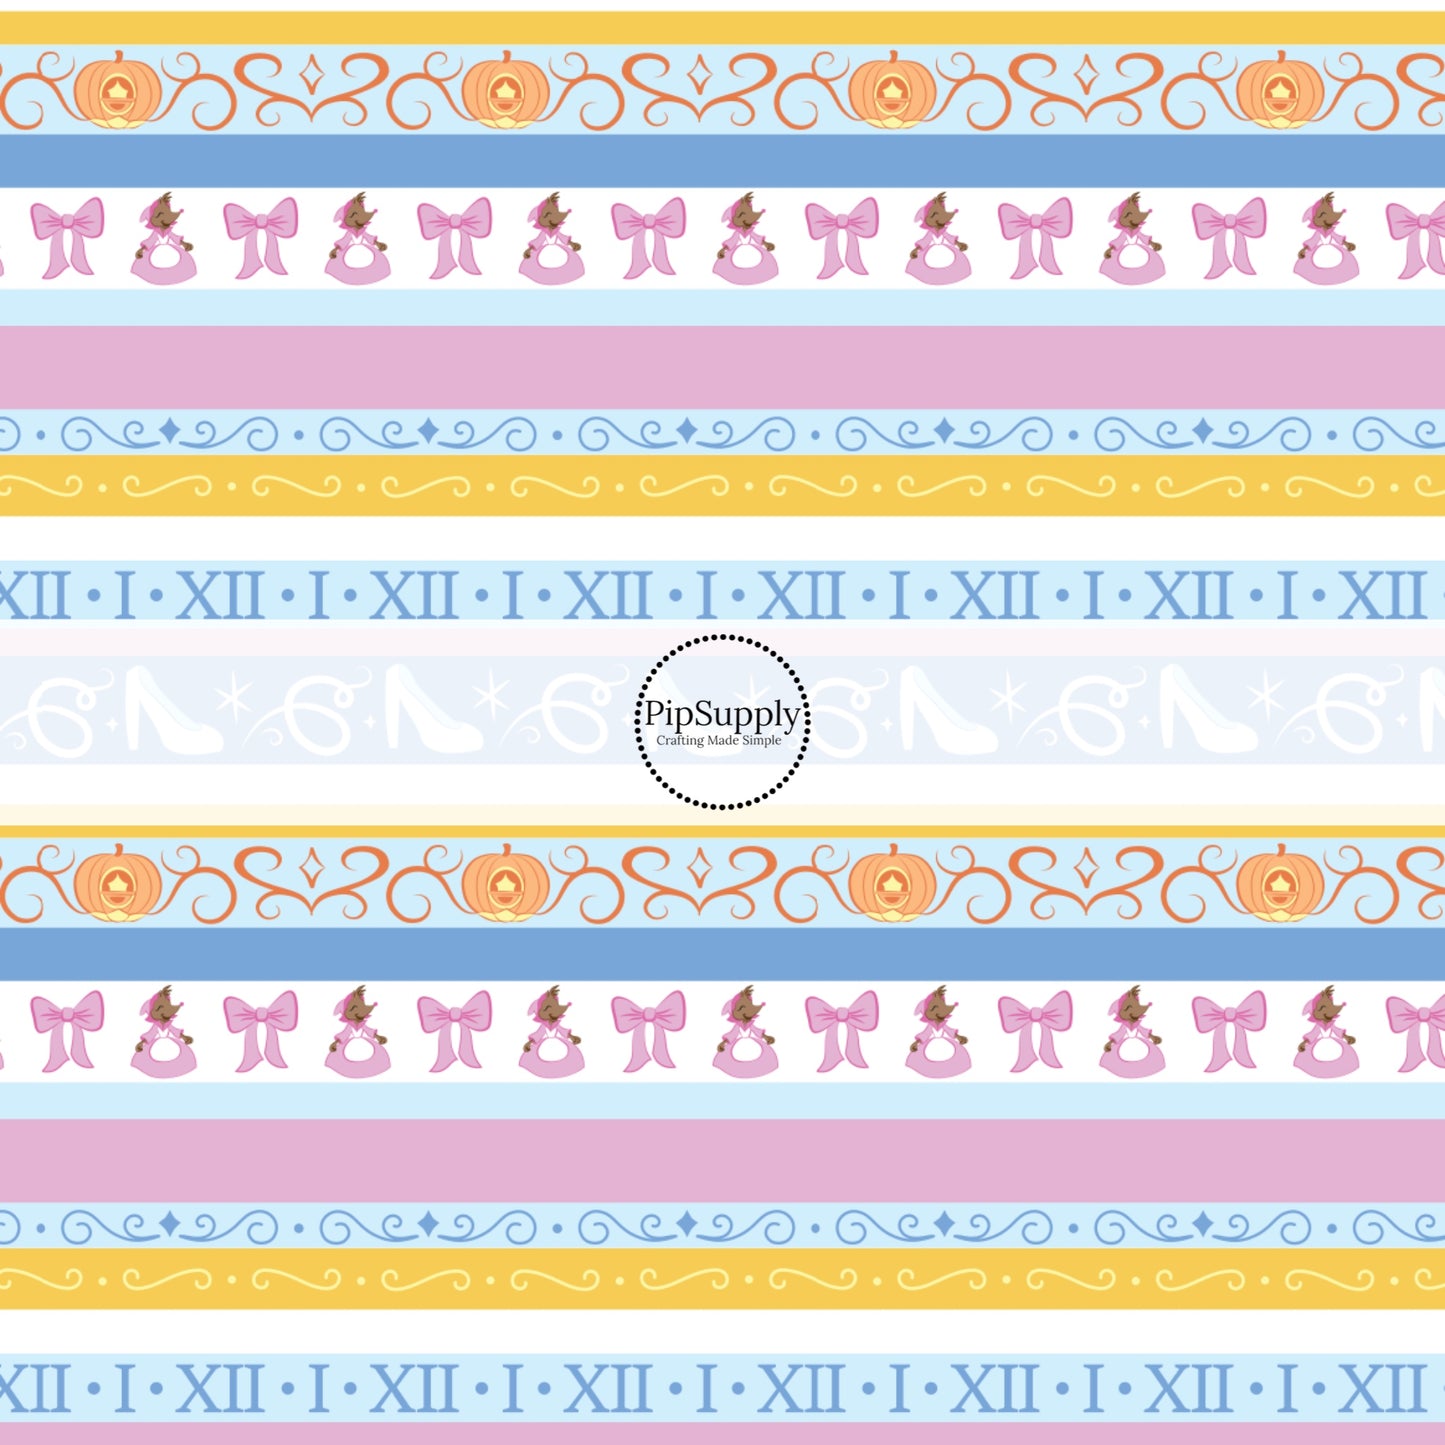 Pumpkin carriage, glass slipper, mouse maid, and swirls on blue and pink stripes hair bow strips